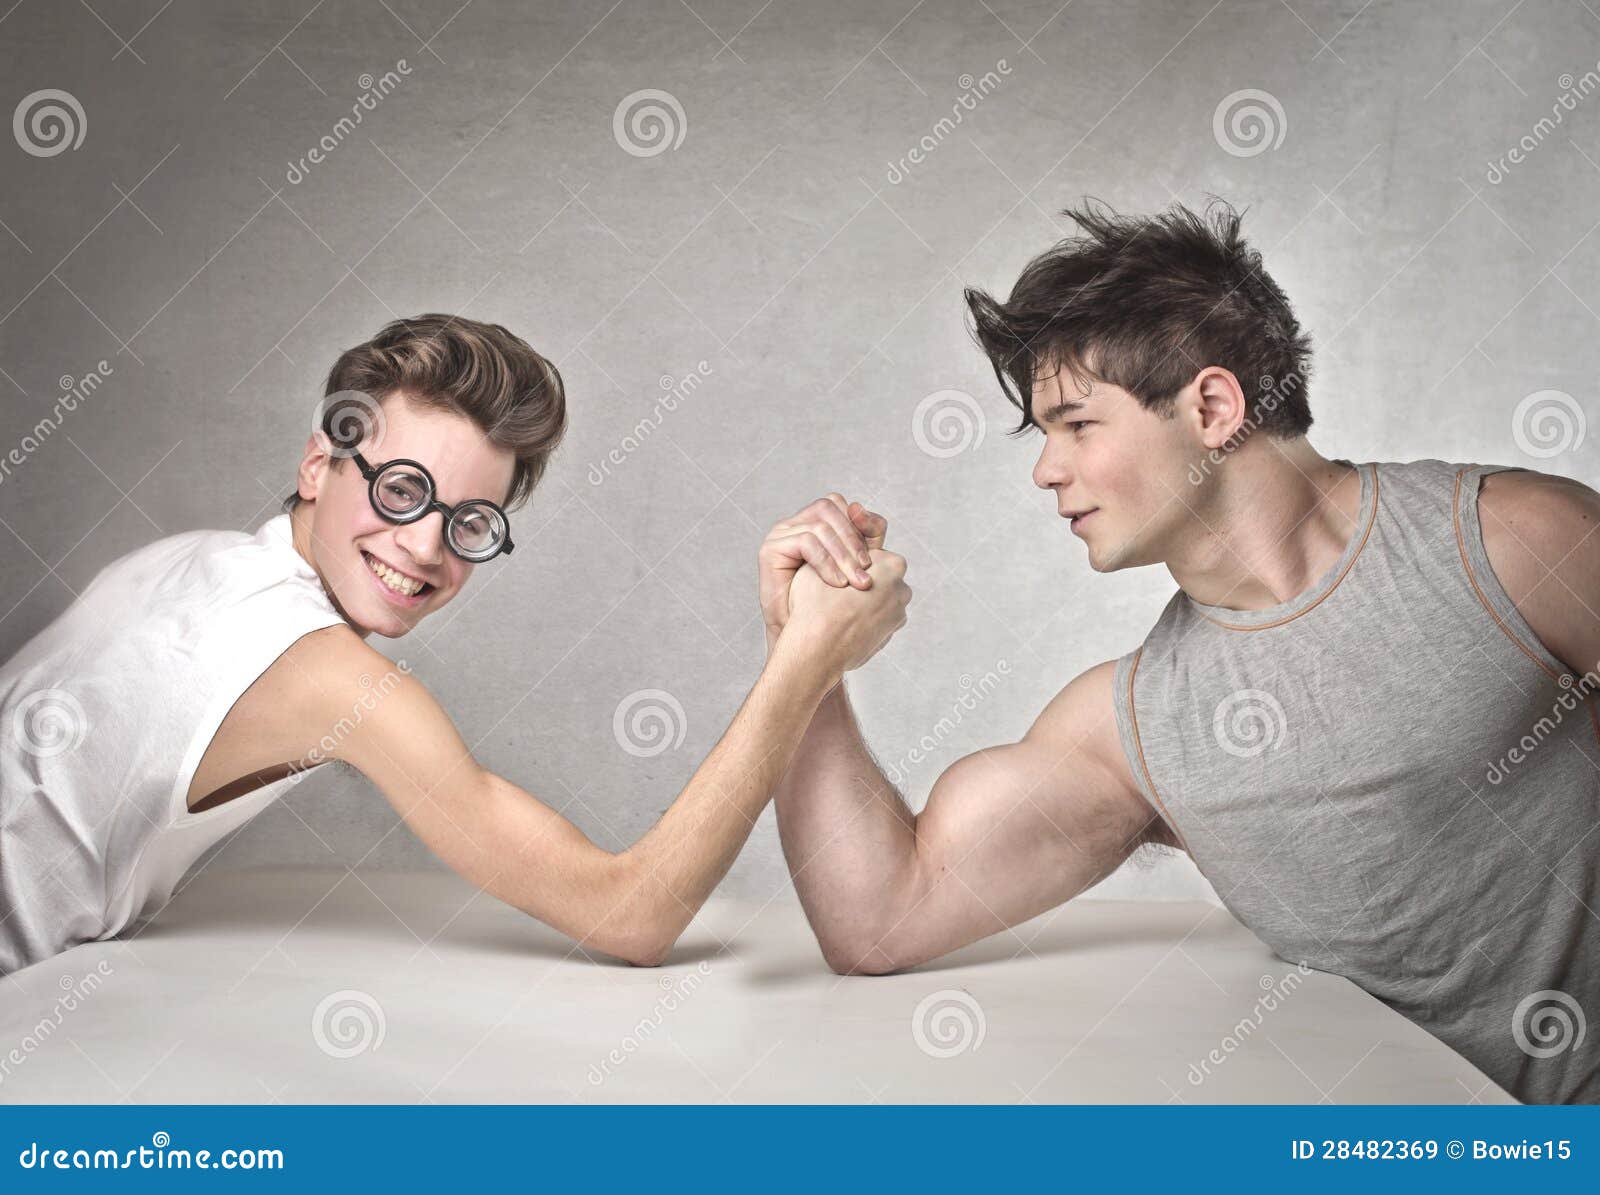 Vs skinny guys guys muscular Muscle Fit